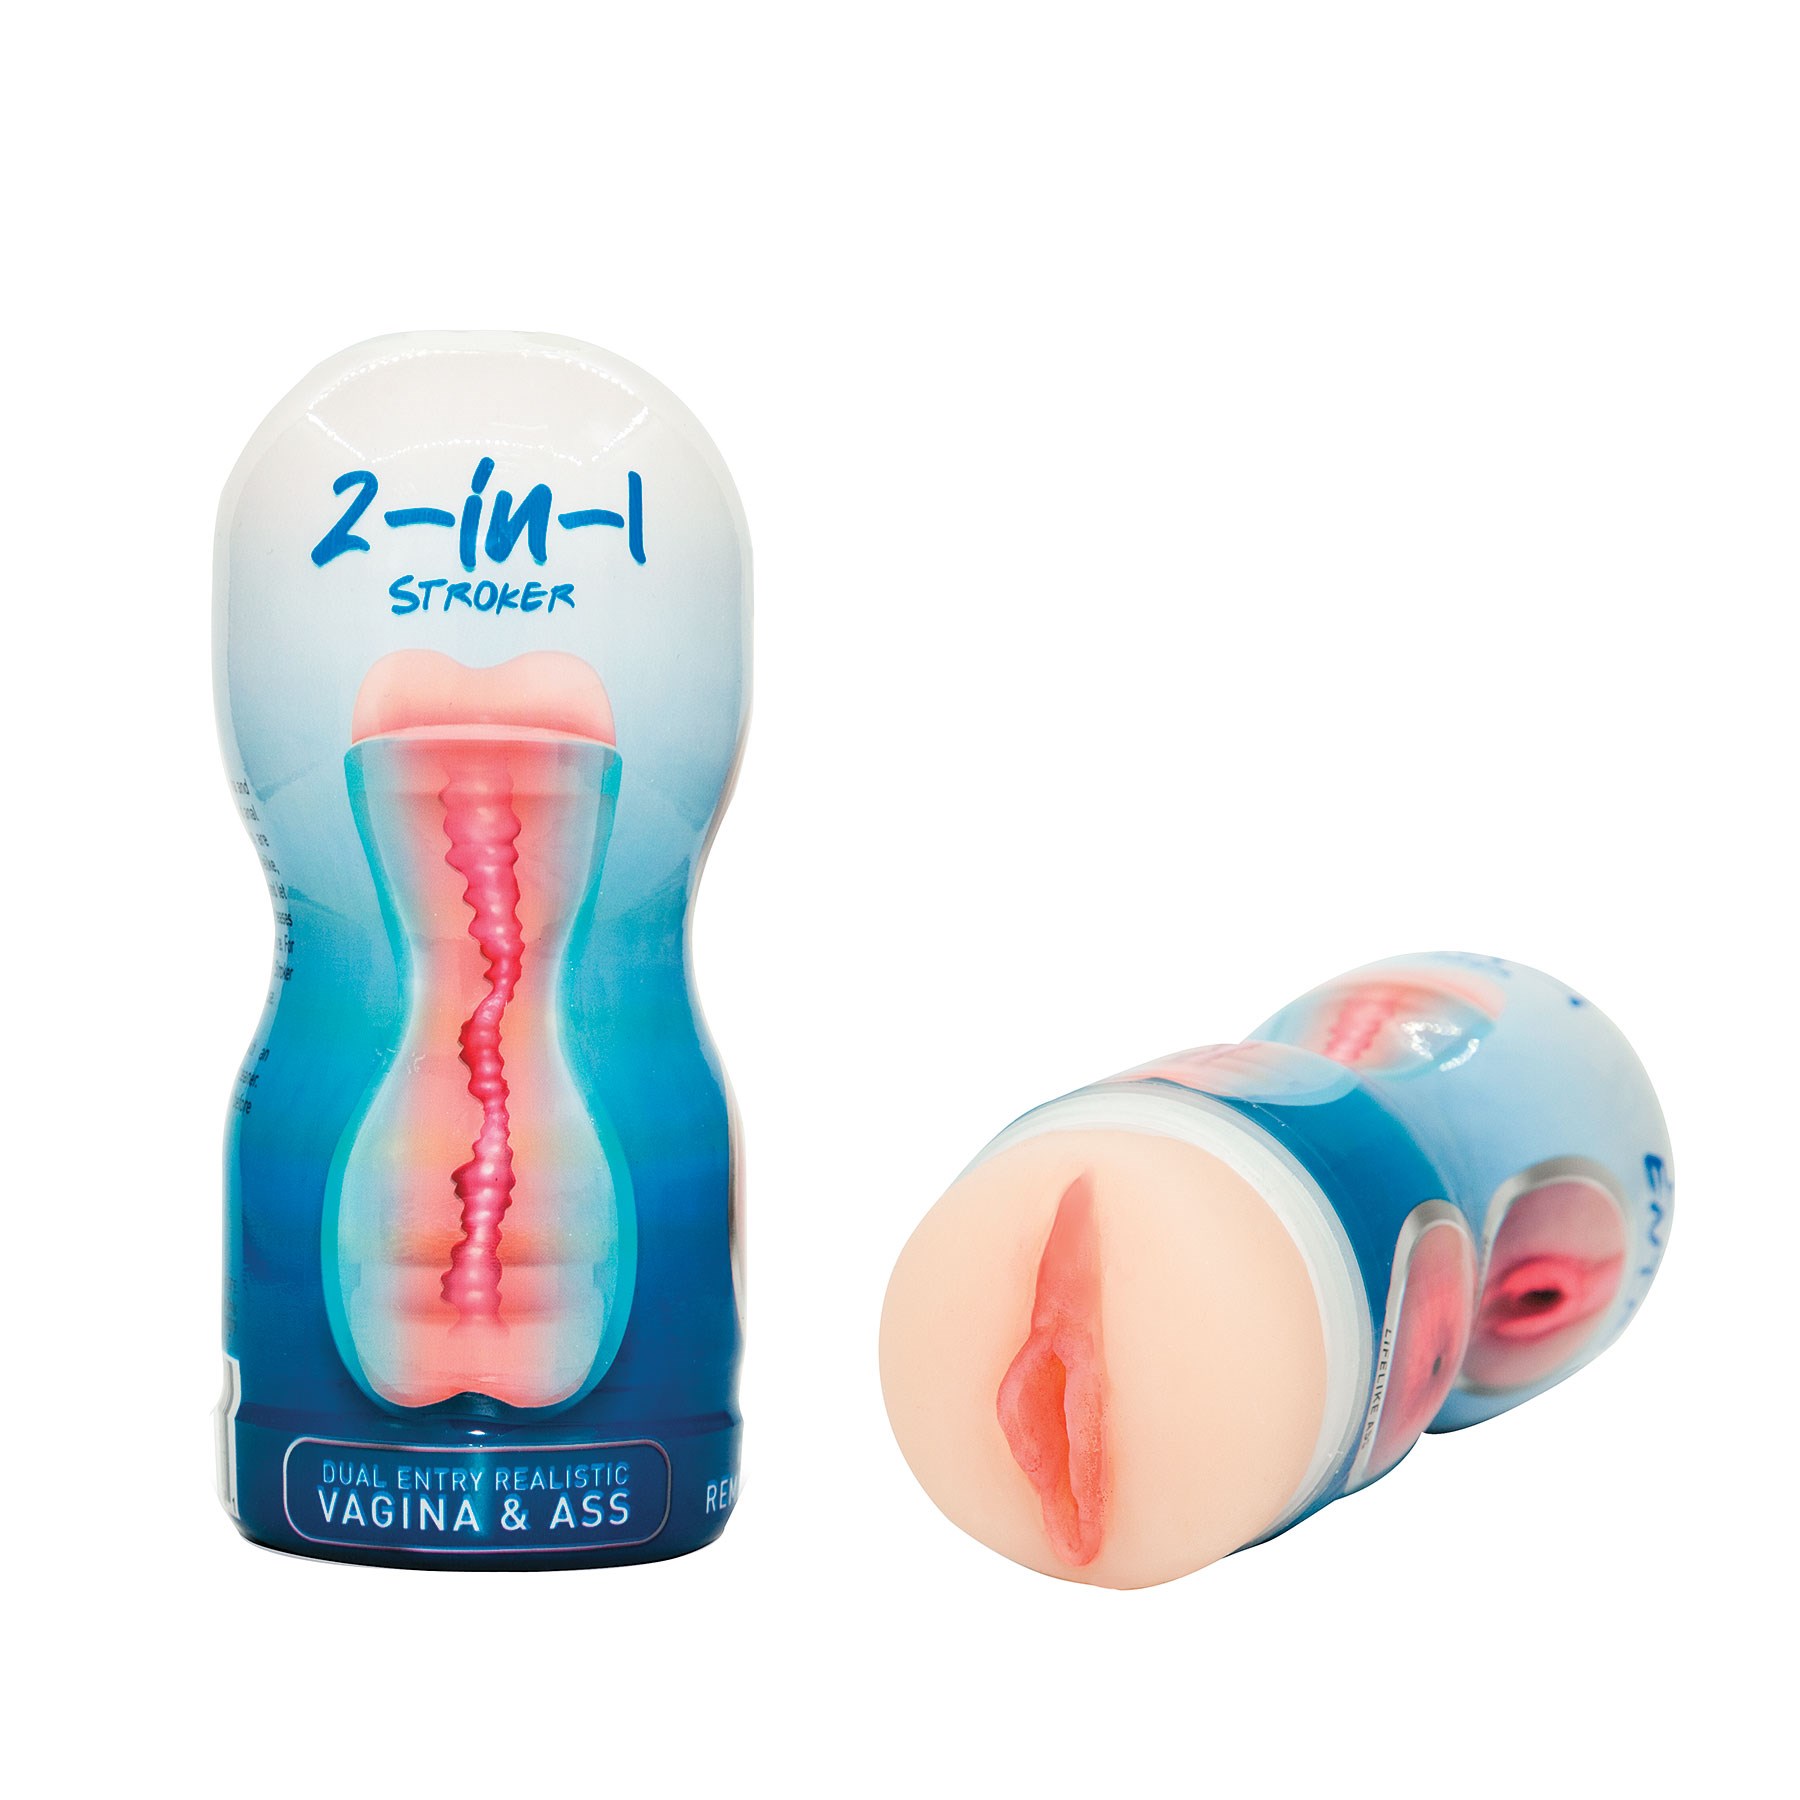 2-In-1 Stroker Realistic Vagina and